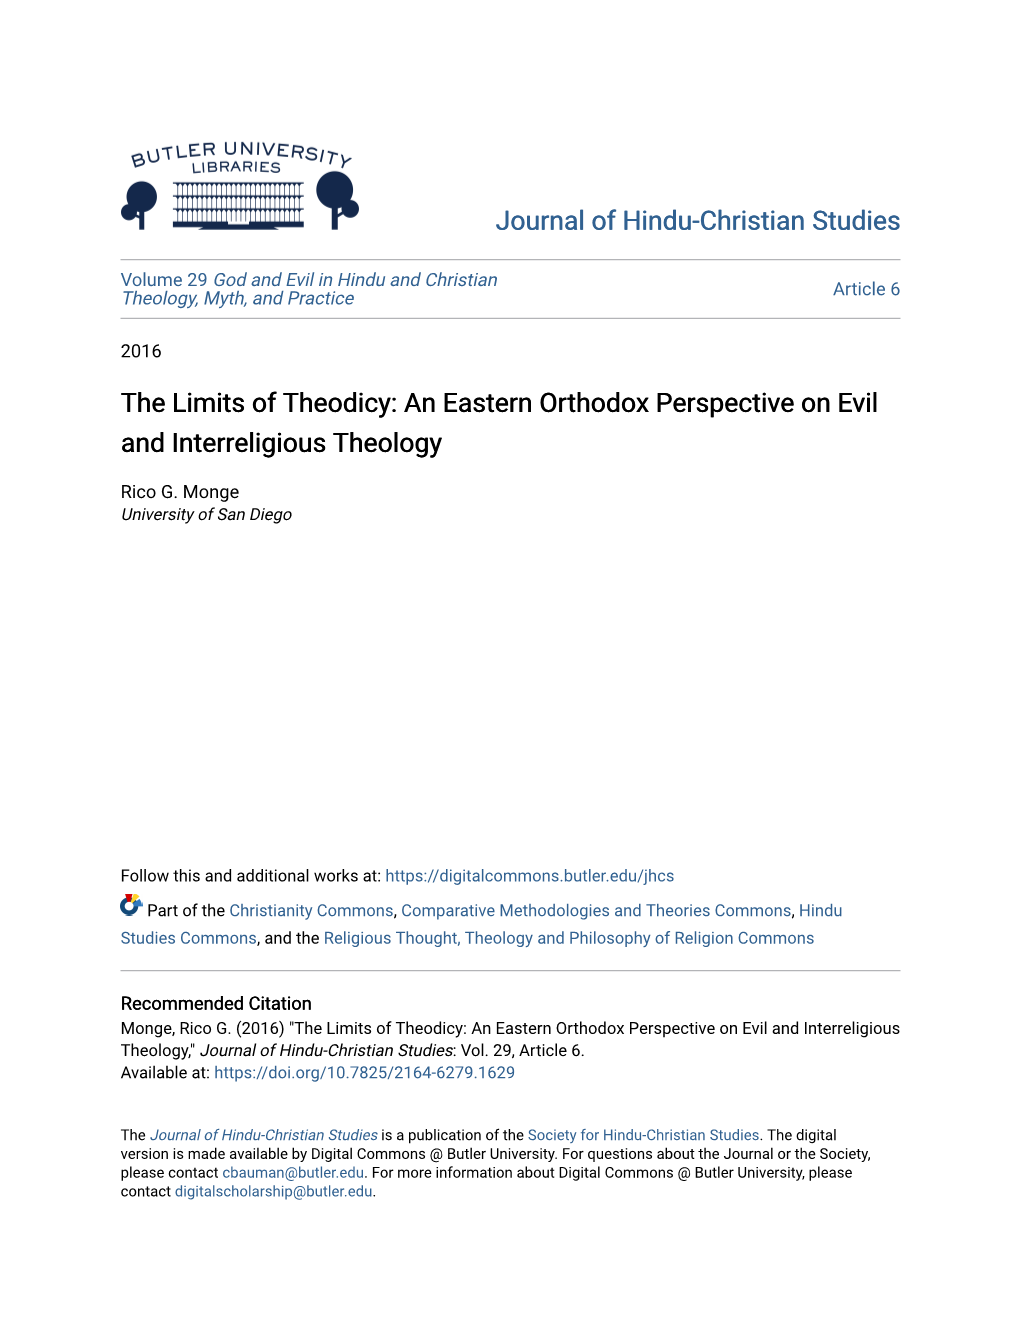 The Limits of Theodicy: an Eastern Orthodox Perspective on Evil and Interreligious Theology